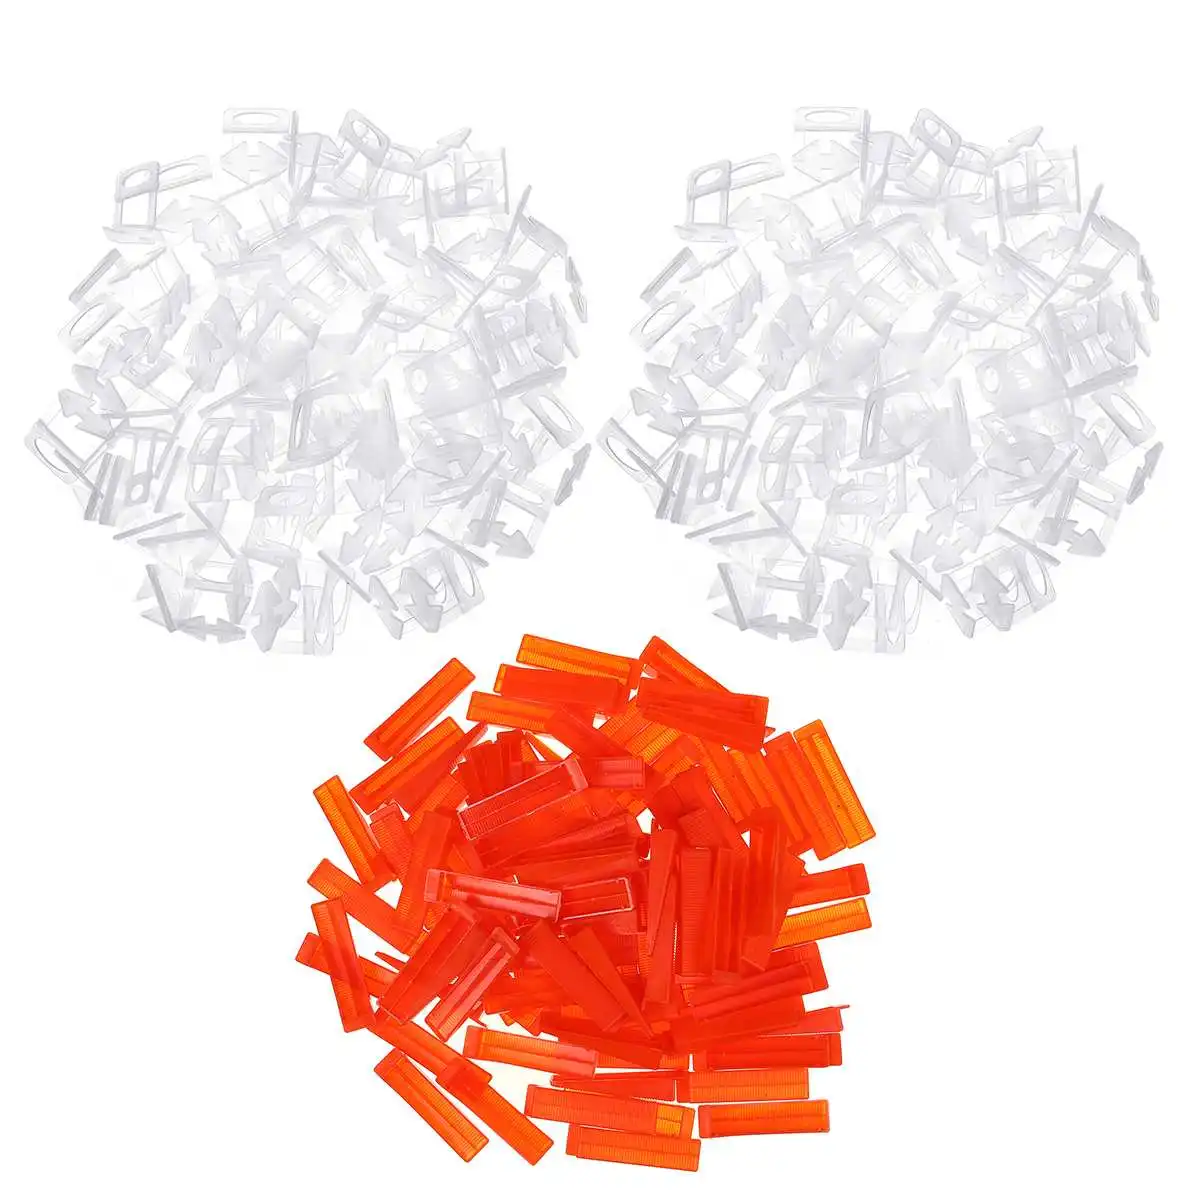 

300PCS Plastic Ceramic Tile Leveling System 200 Clips+100 Wedges Tiling Floor Wall Carrelage Tools Clips Spacers Locator Leveler